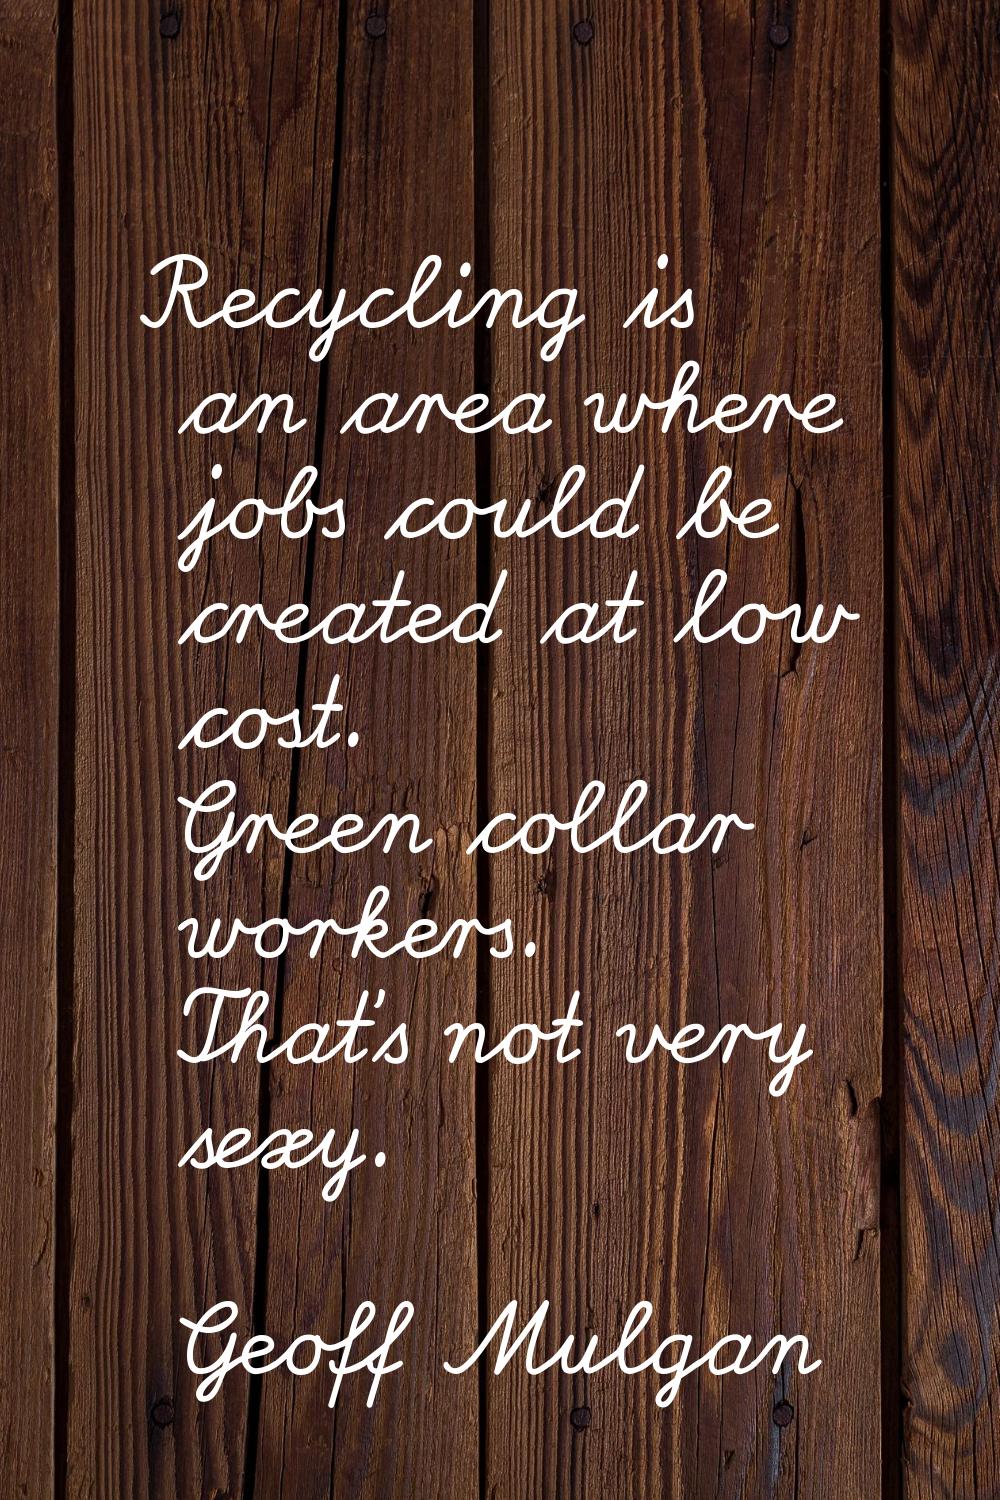 Recycling is an area where jobs could be created at low cost. Green collar workers. That's not very